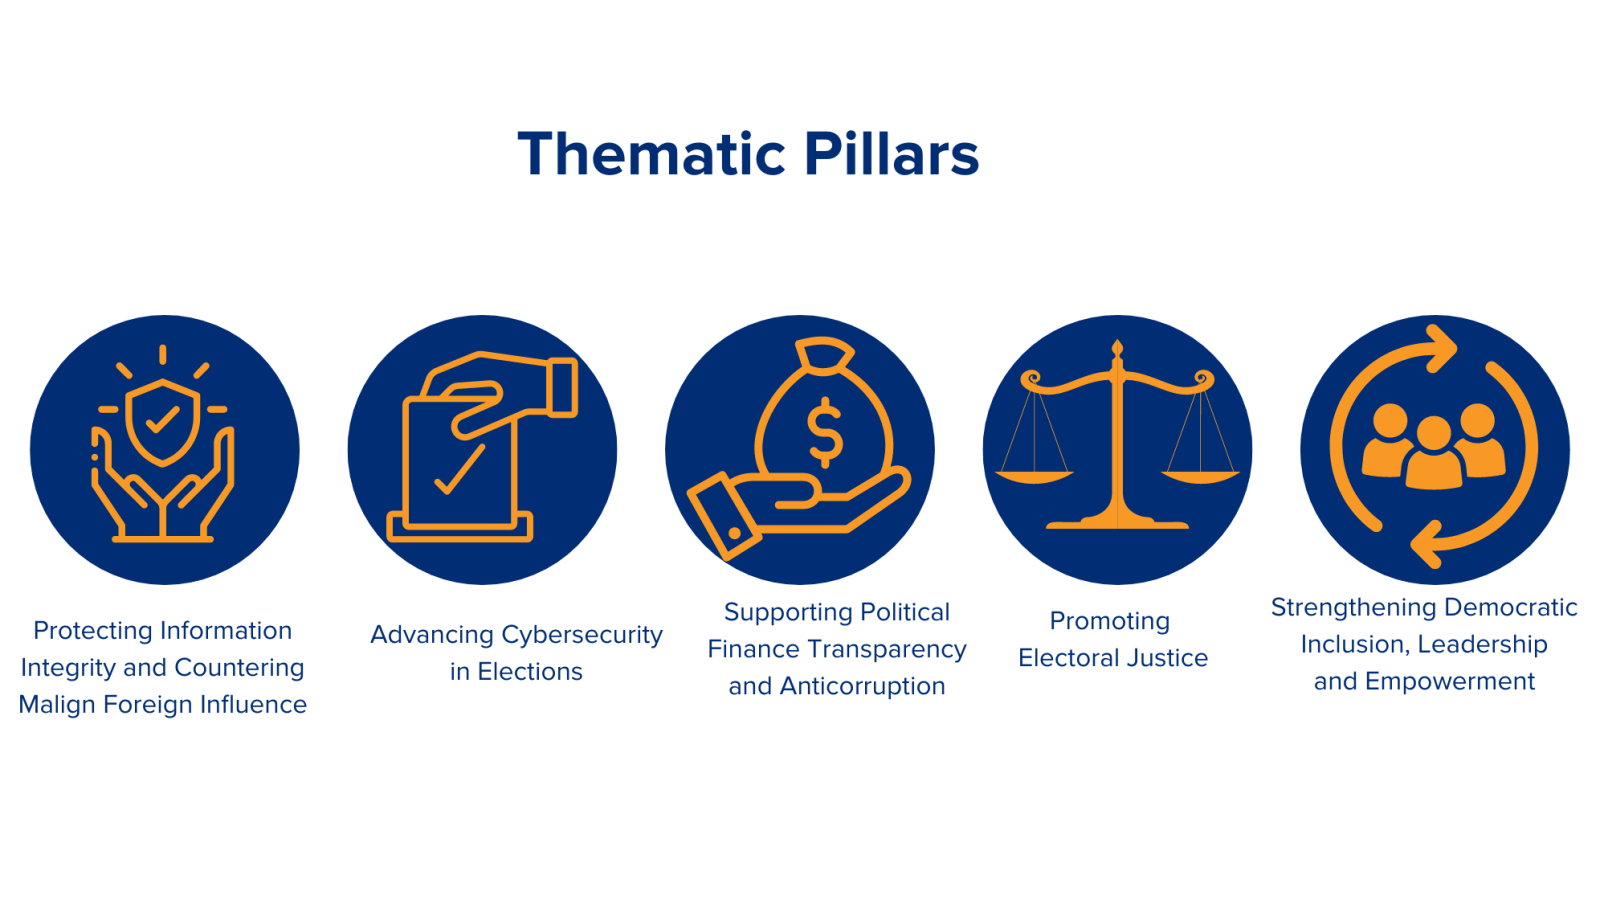 Thematic Pillars Protecting Information Integrity and Countering Malign Foreign Influence Advancing Cybersecurity In Elections Supporting Political Finance Transparency and Anticorruption Promoting Electoral Justice Strengthening Democratic Inclusion, Leadership and Empowerment